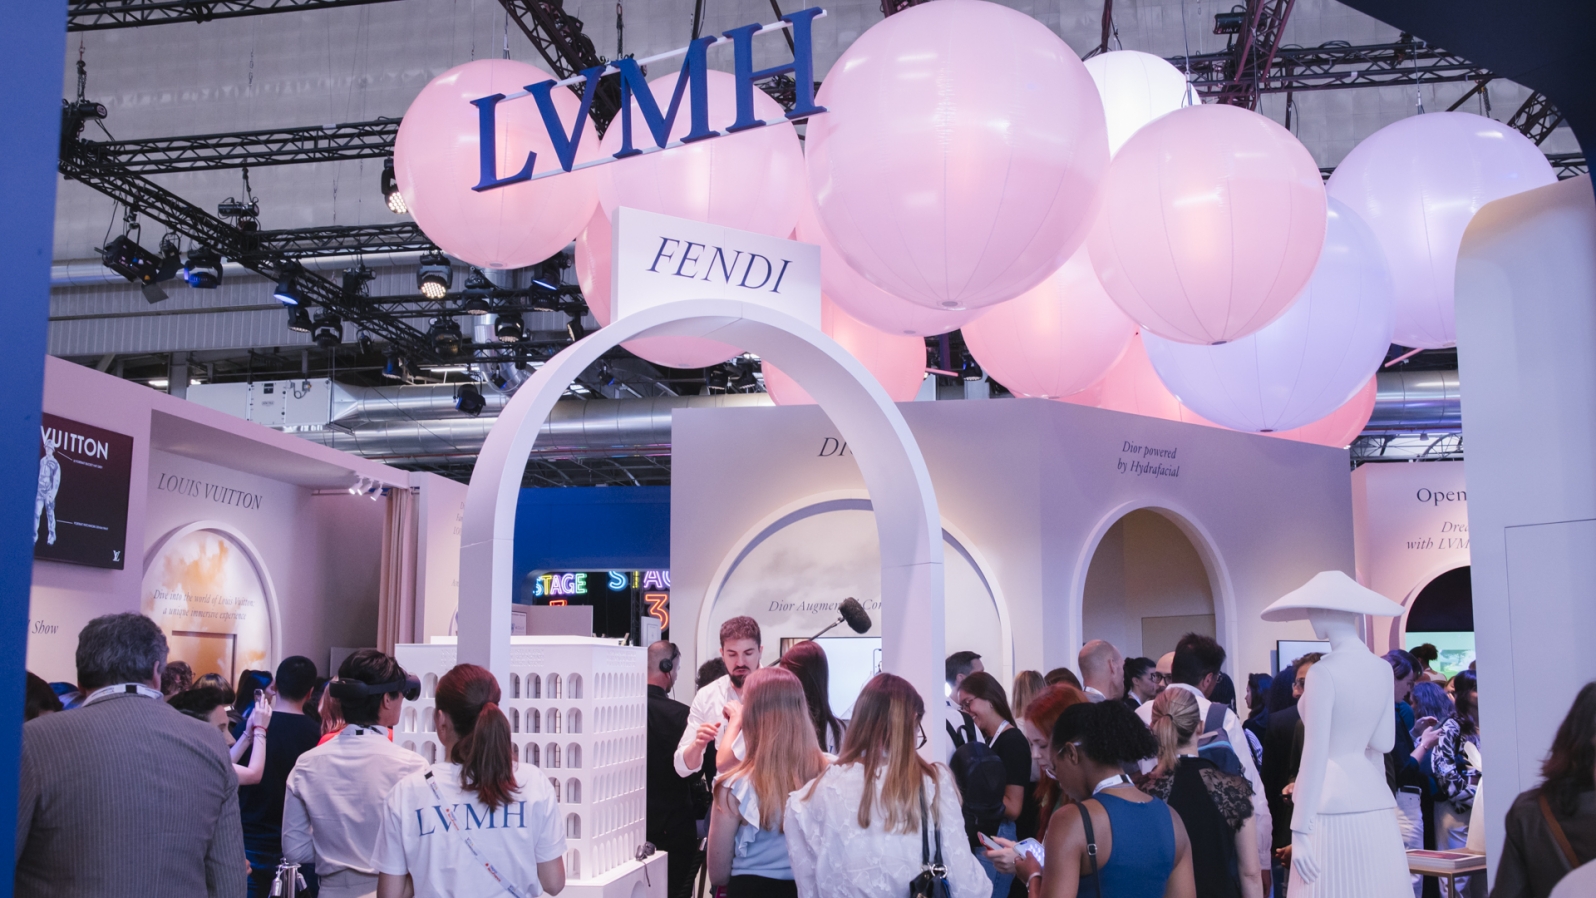 Zenith taps into 'evolving consumer behaviours' at VIVA Technology with LVMH